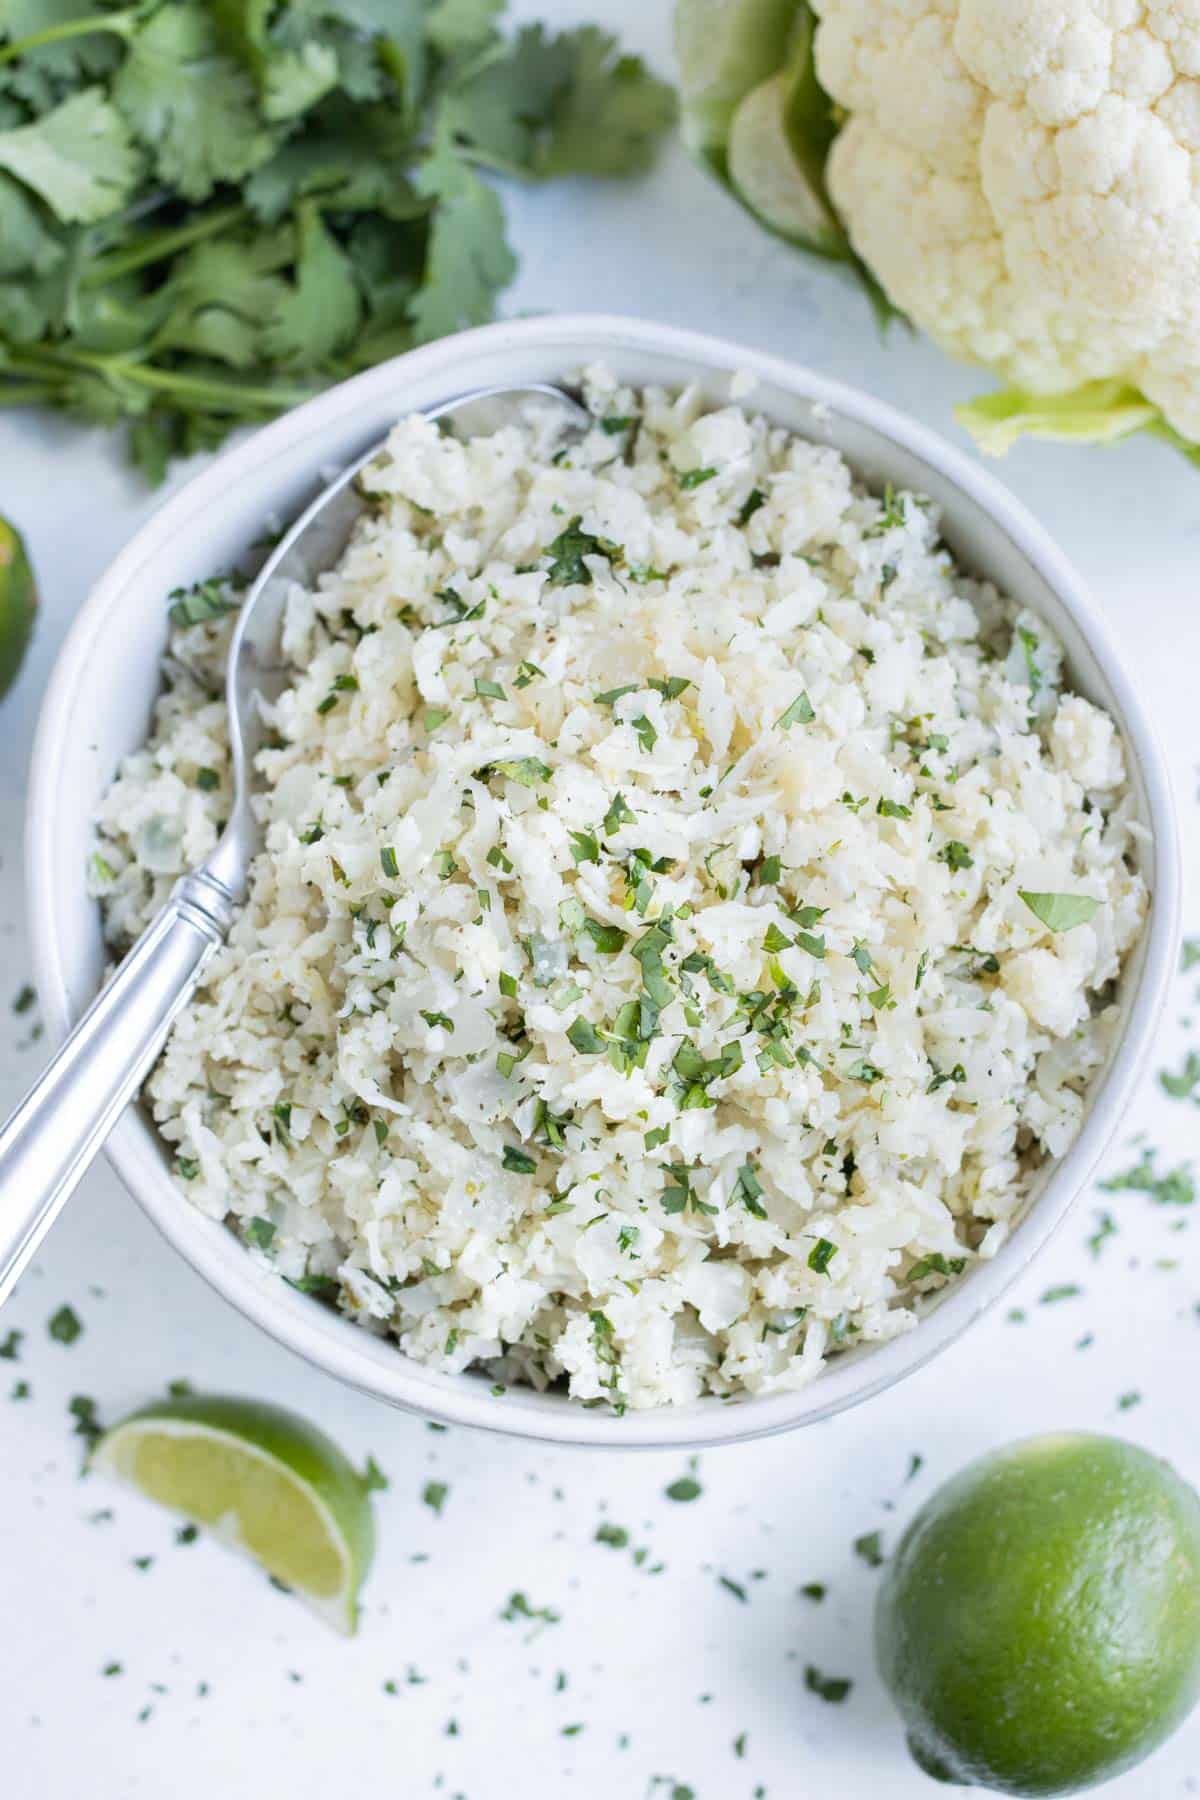 Serve this cauliflower rice in place of traditional grains in your favorite dishes.